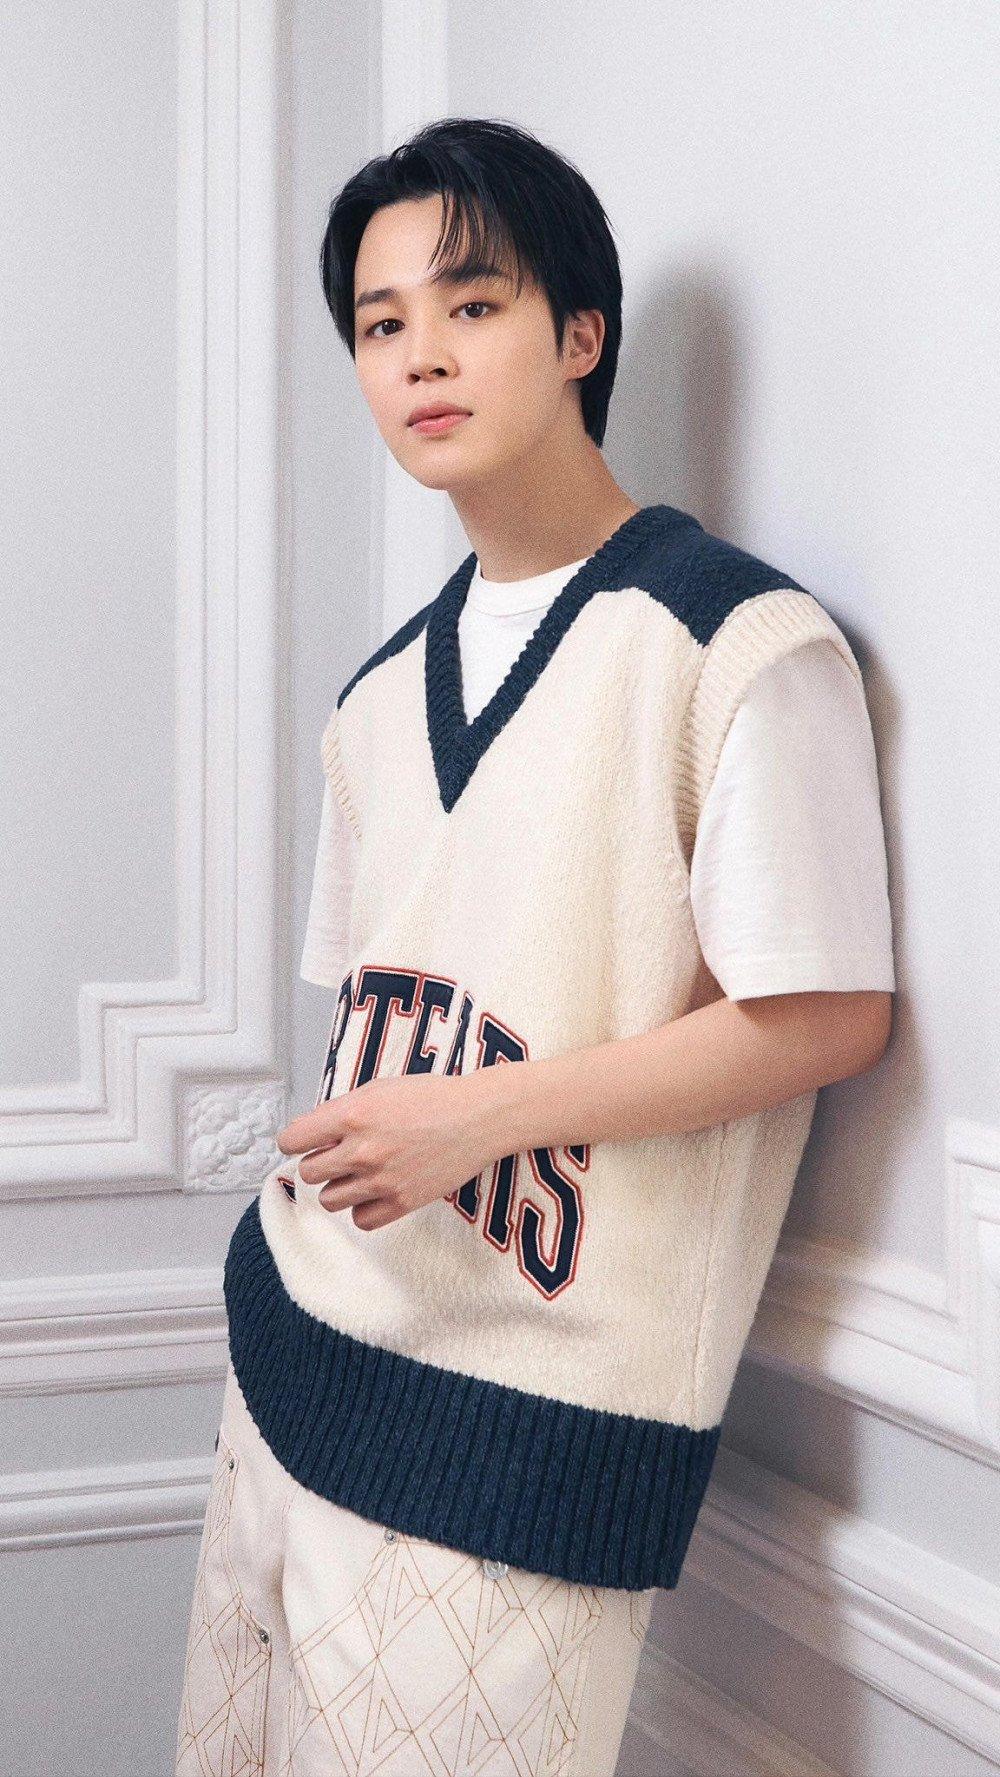 BTSs Jimin dons charming Dior knitwear in new pictorial images